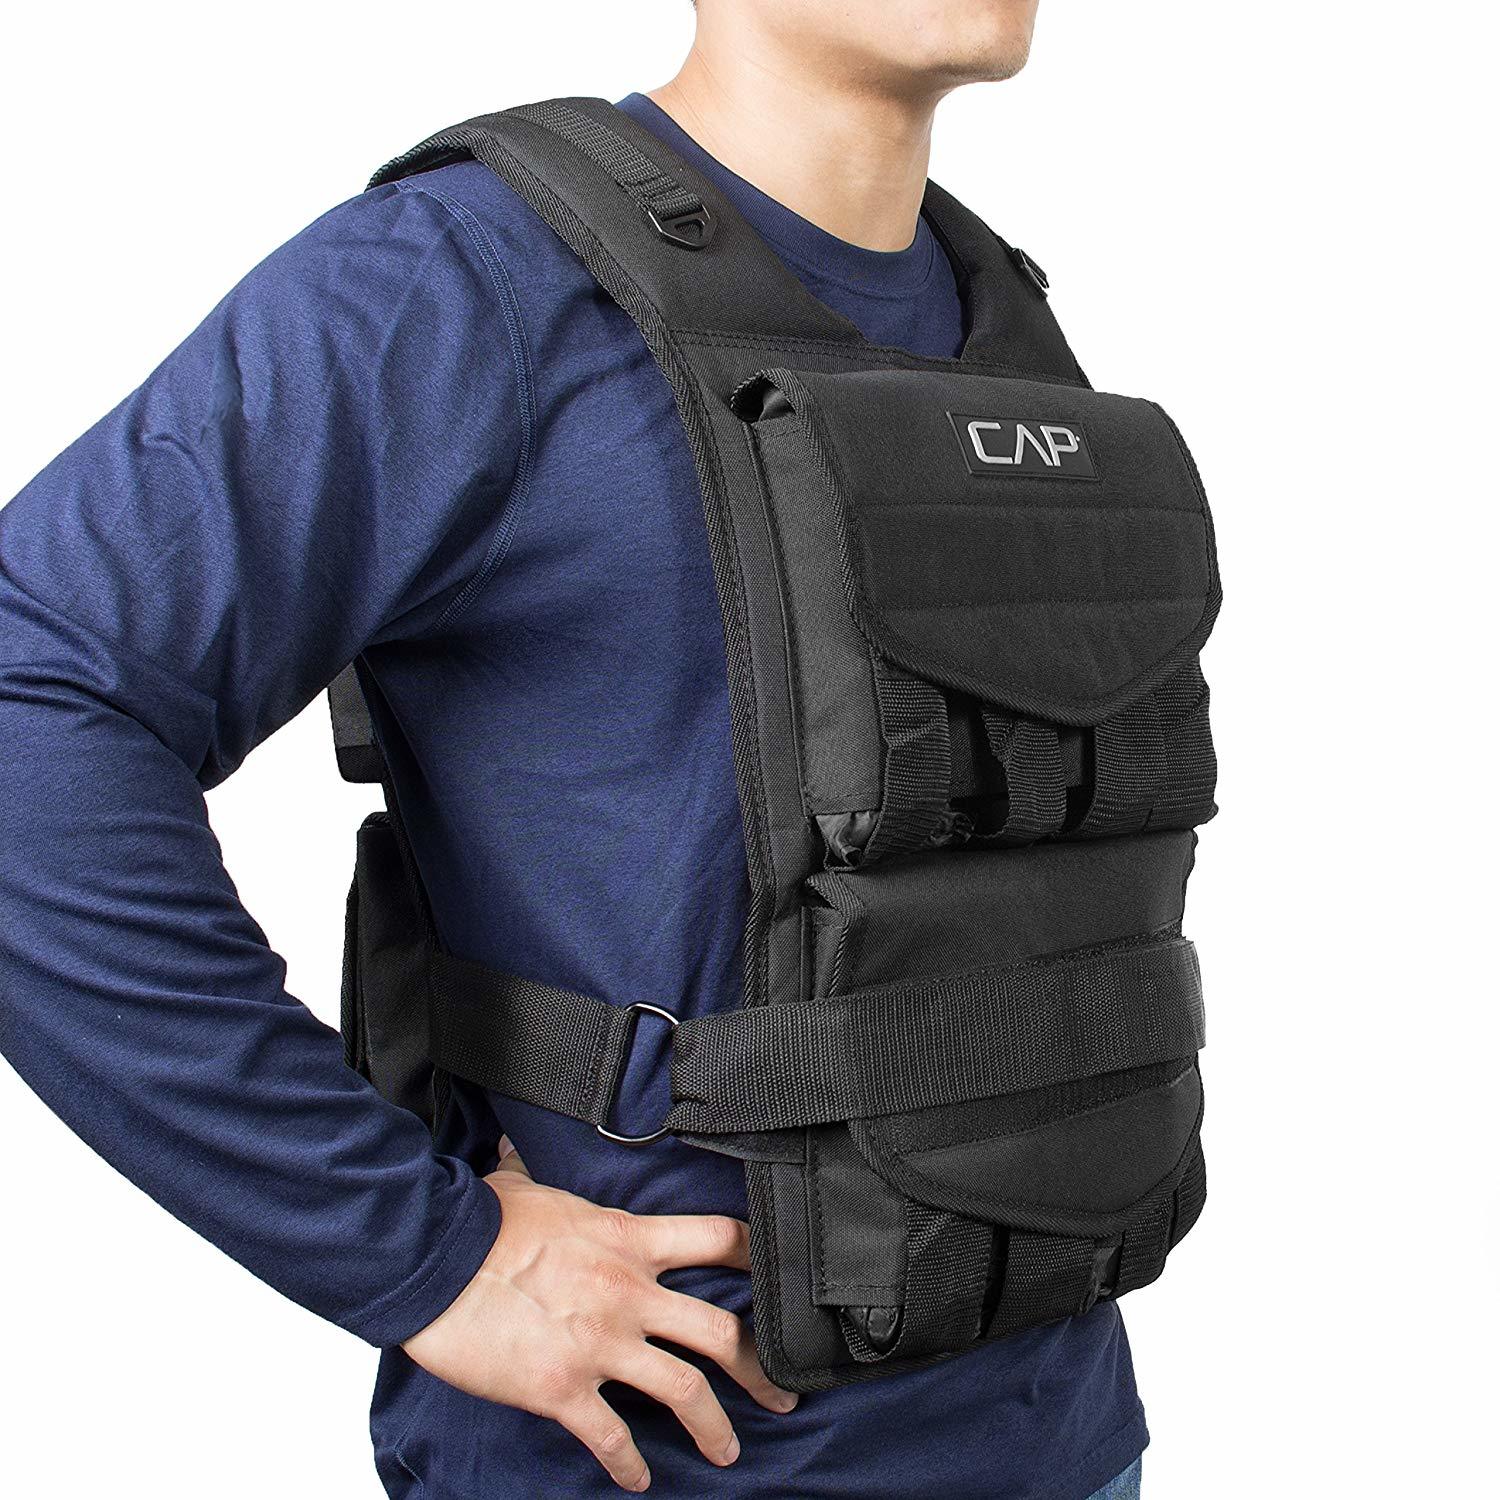 4 best weighted vests for running and crossfit that will change the way U train 9